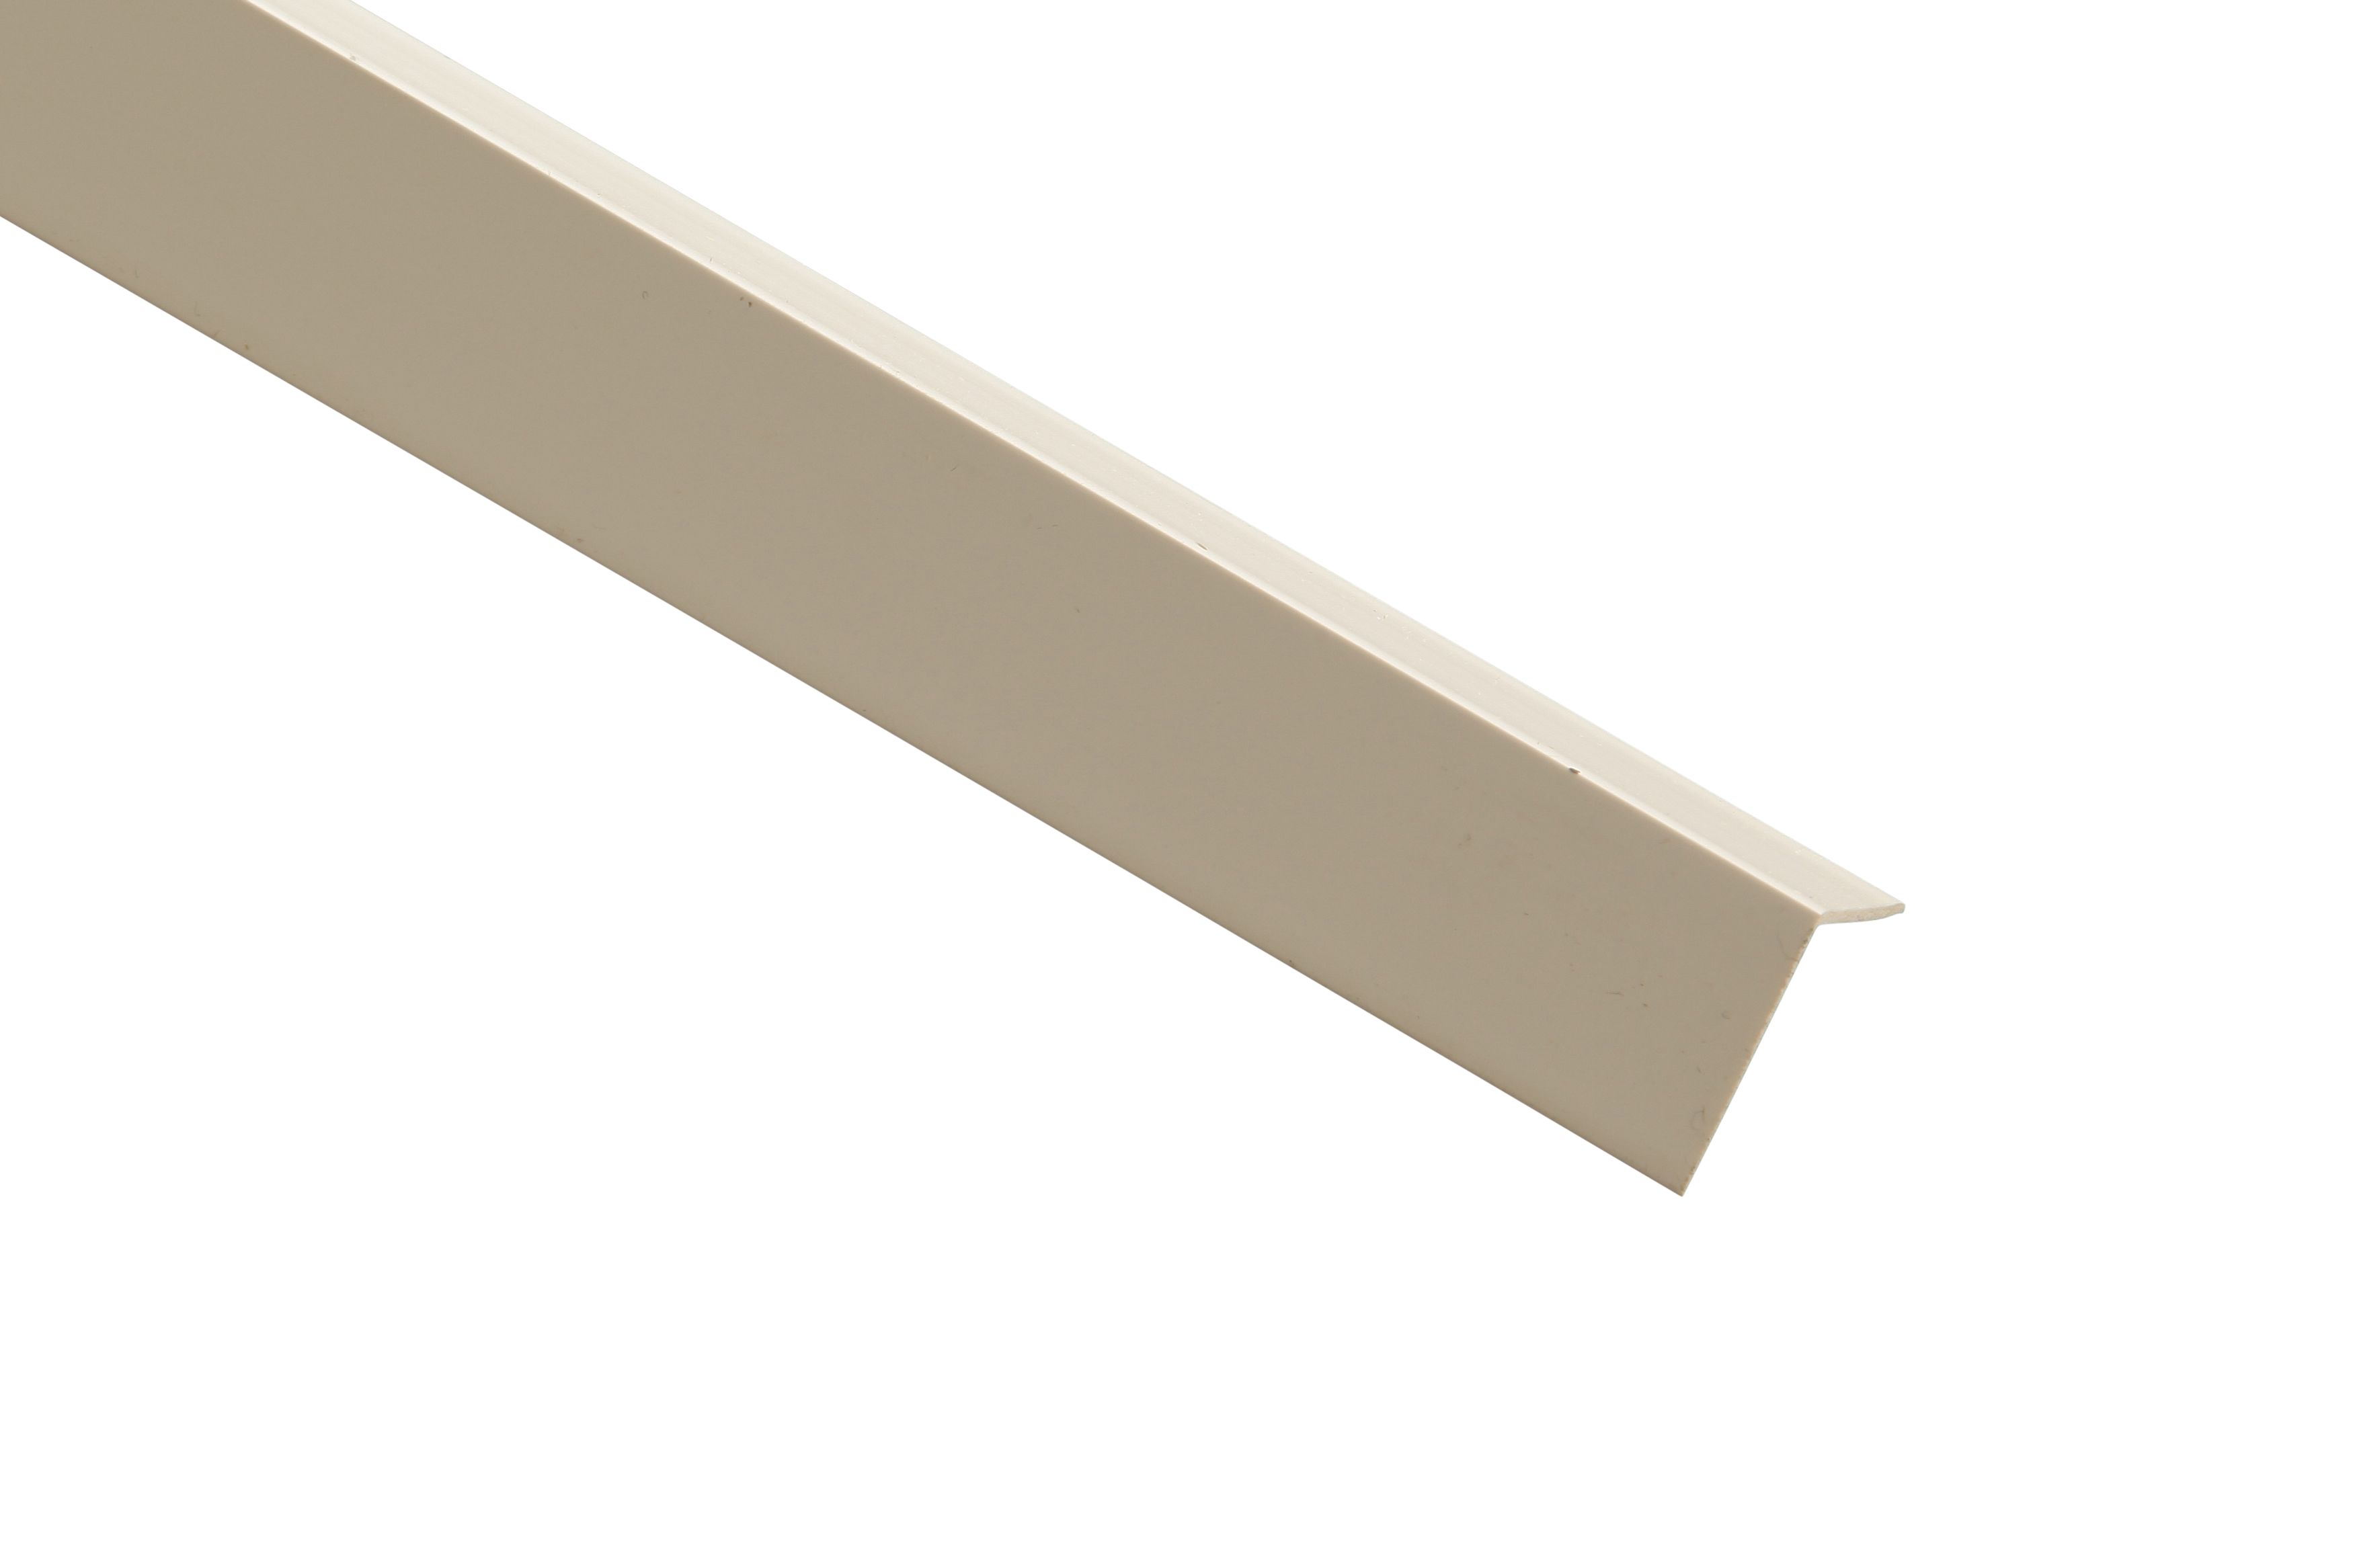 Image of Wickes PVC Angle Moulding - 25 x 25 x 2400mm